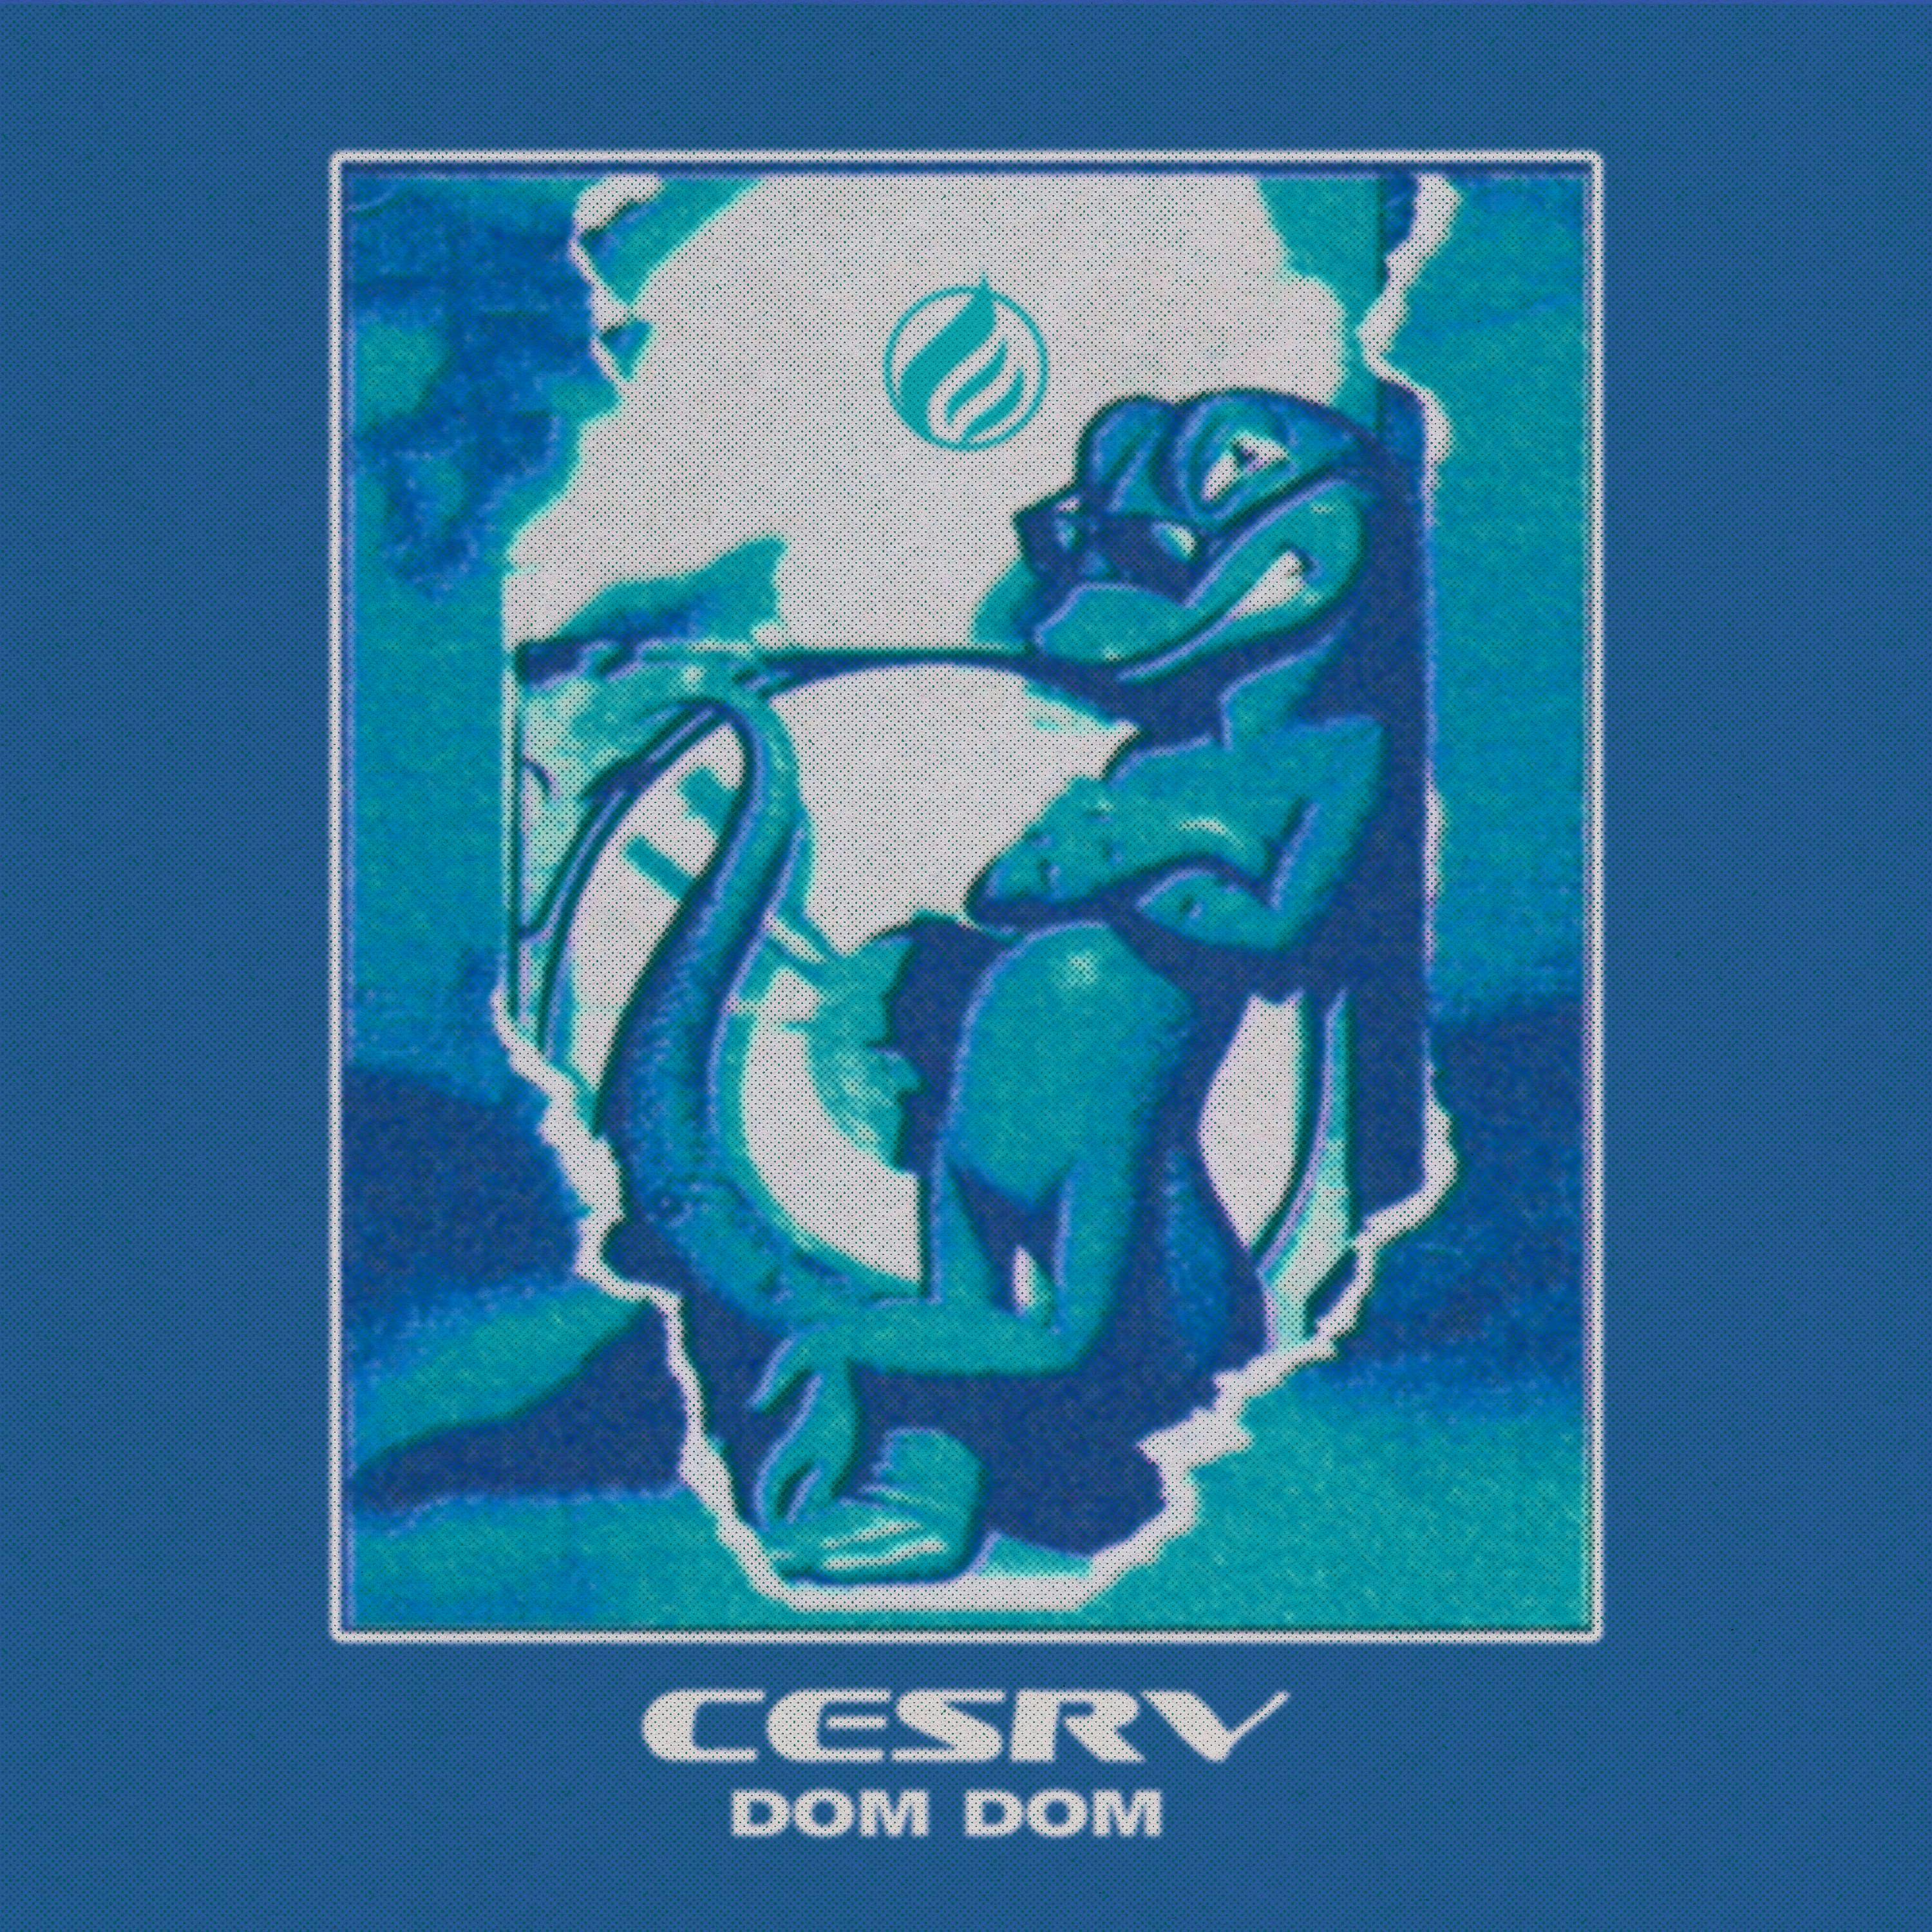 Cover art for Cesrv's song: Dom Dom